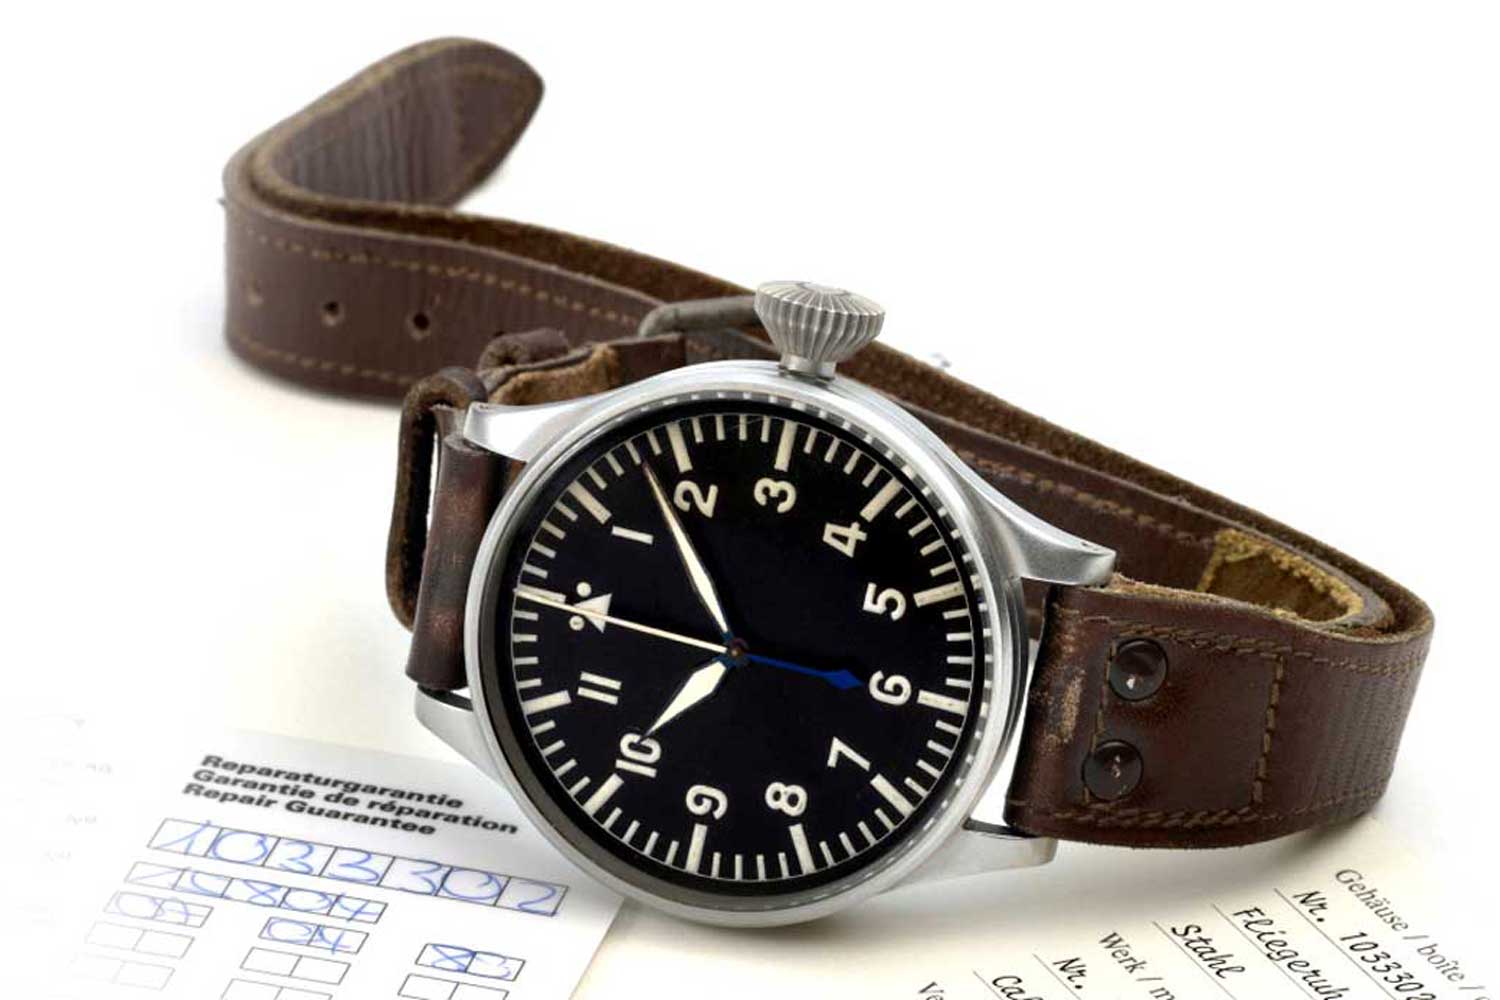 IWC B-Uhr with Type A dial (1940)